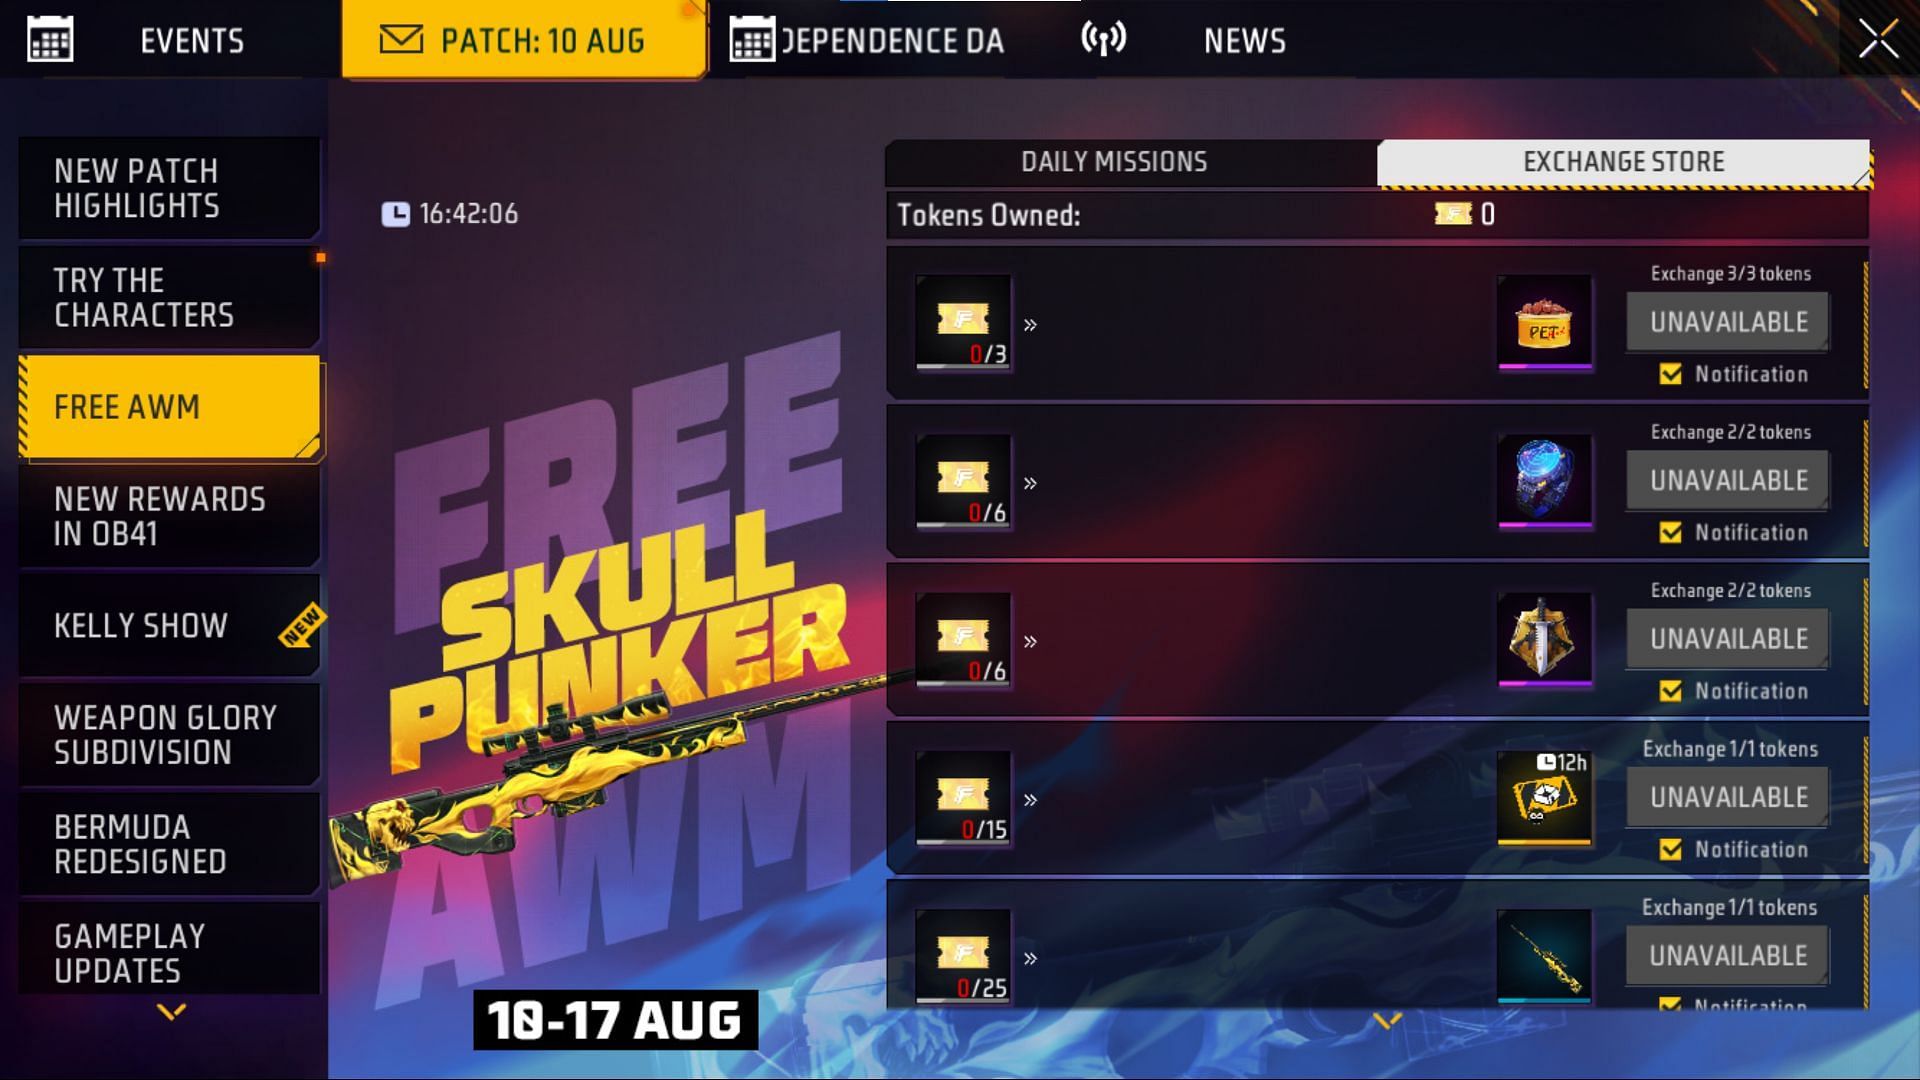 Free AWM skin is also up for grabs (Image via Garena)